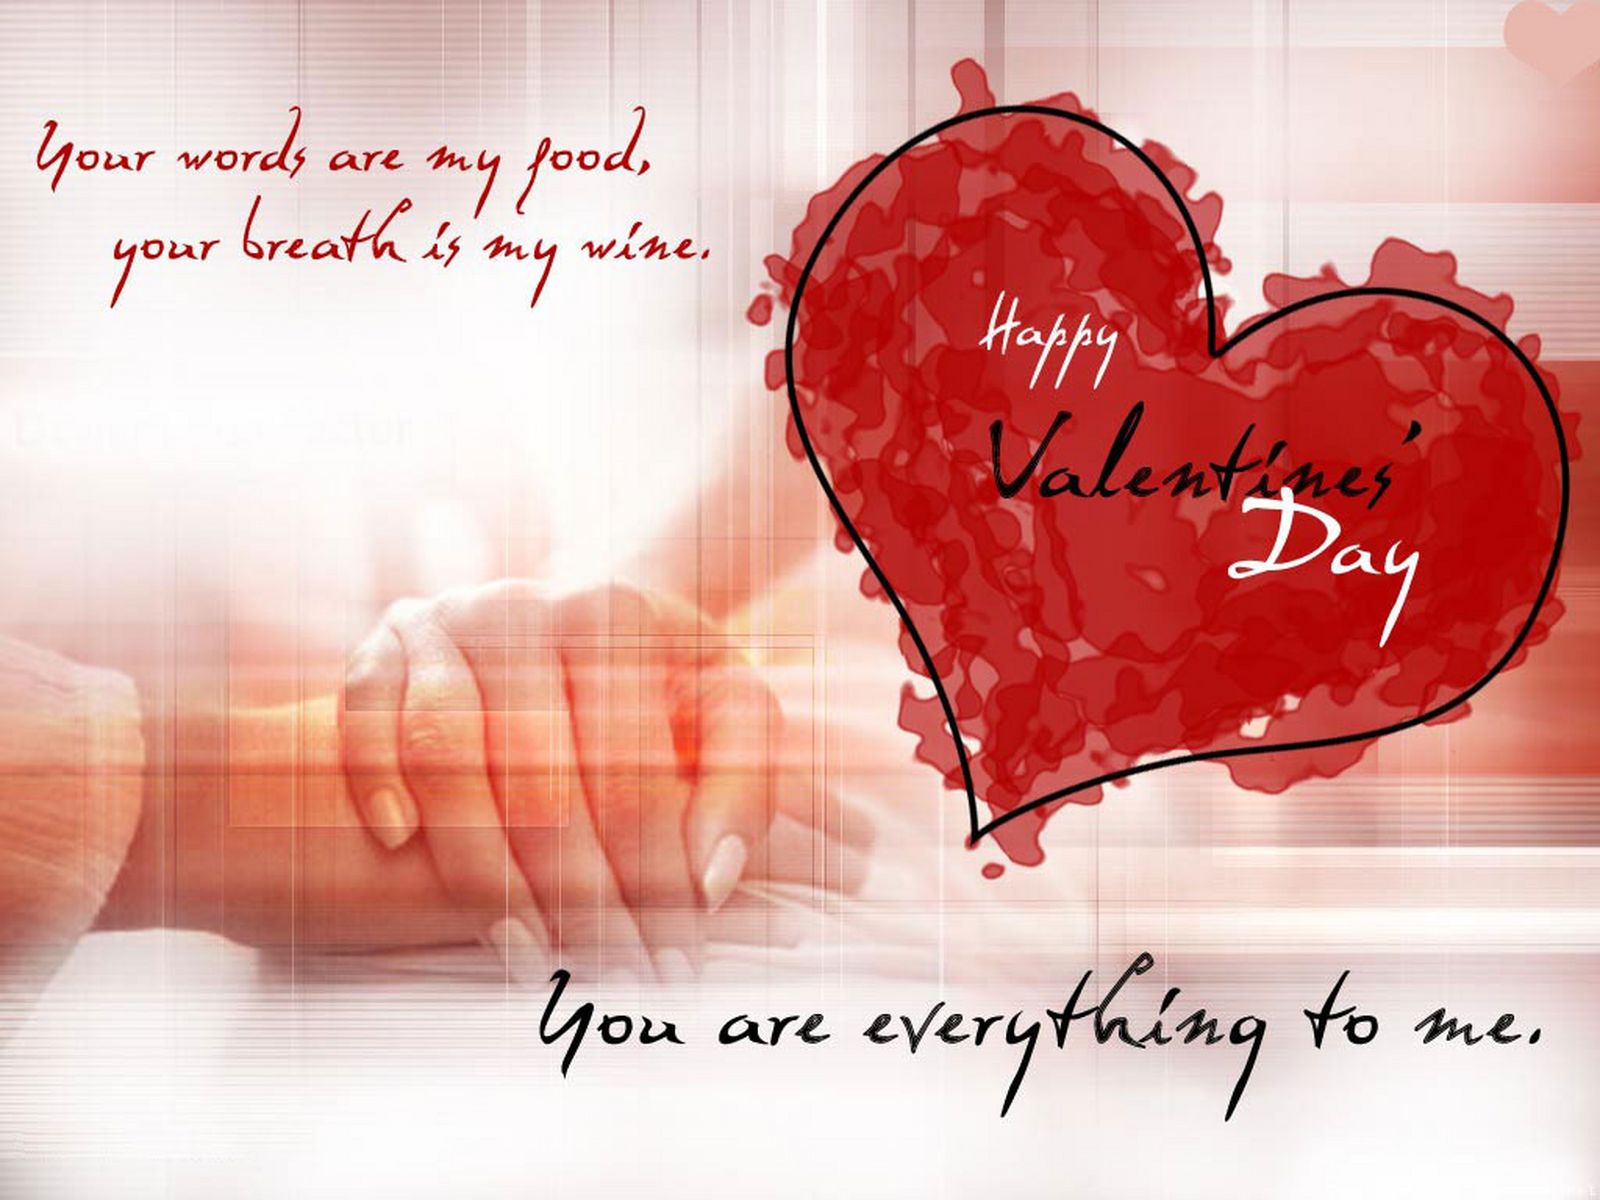 valentines day wishes images 